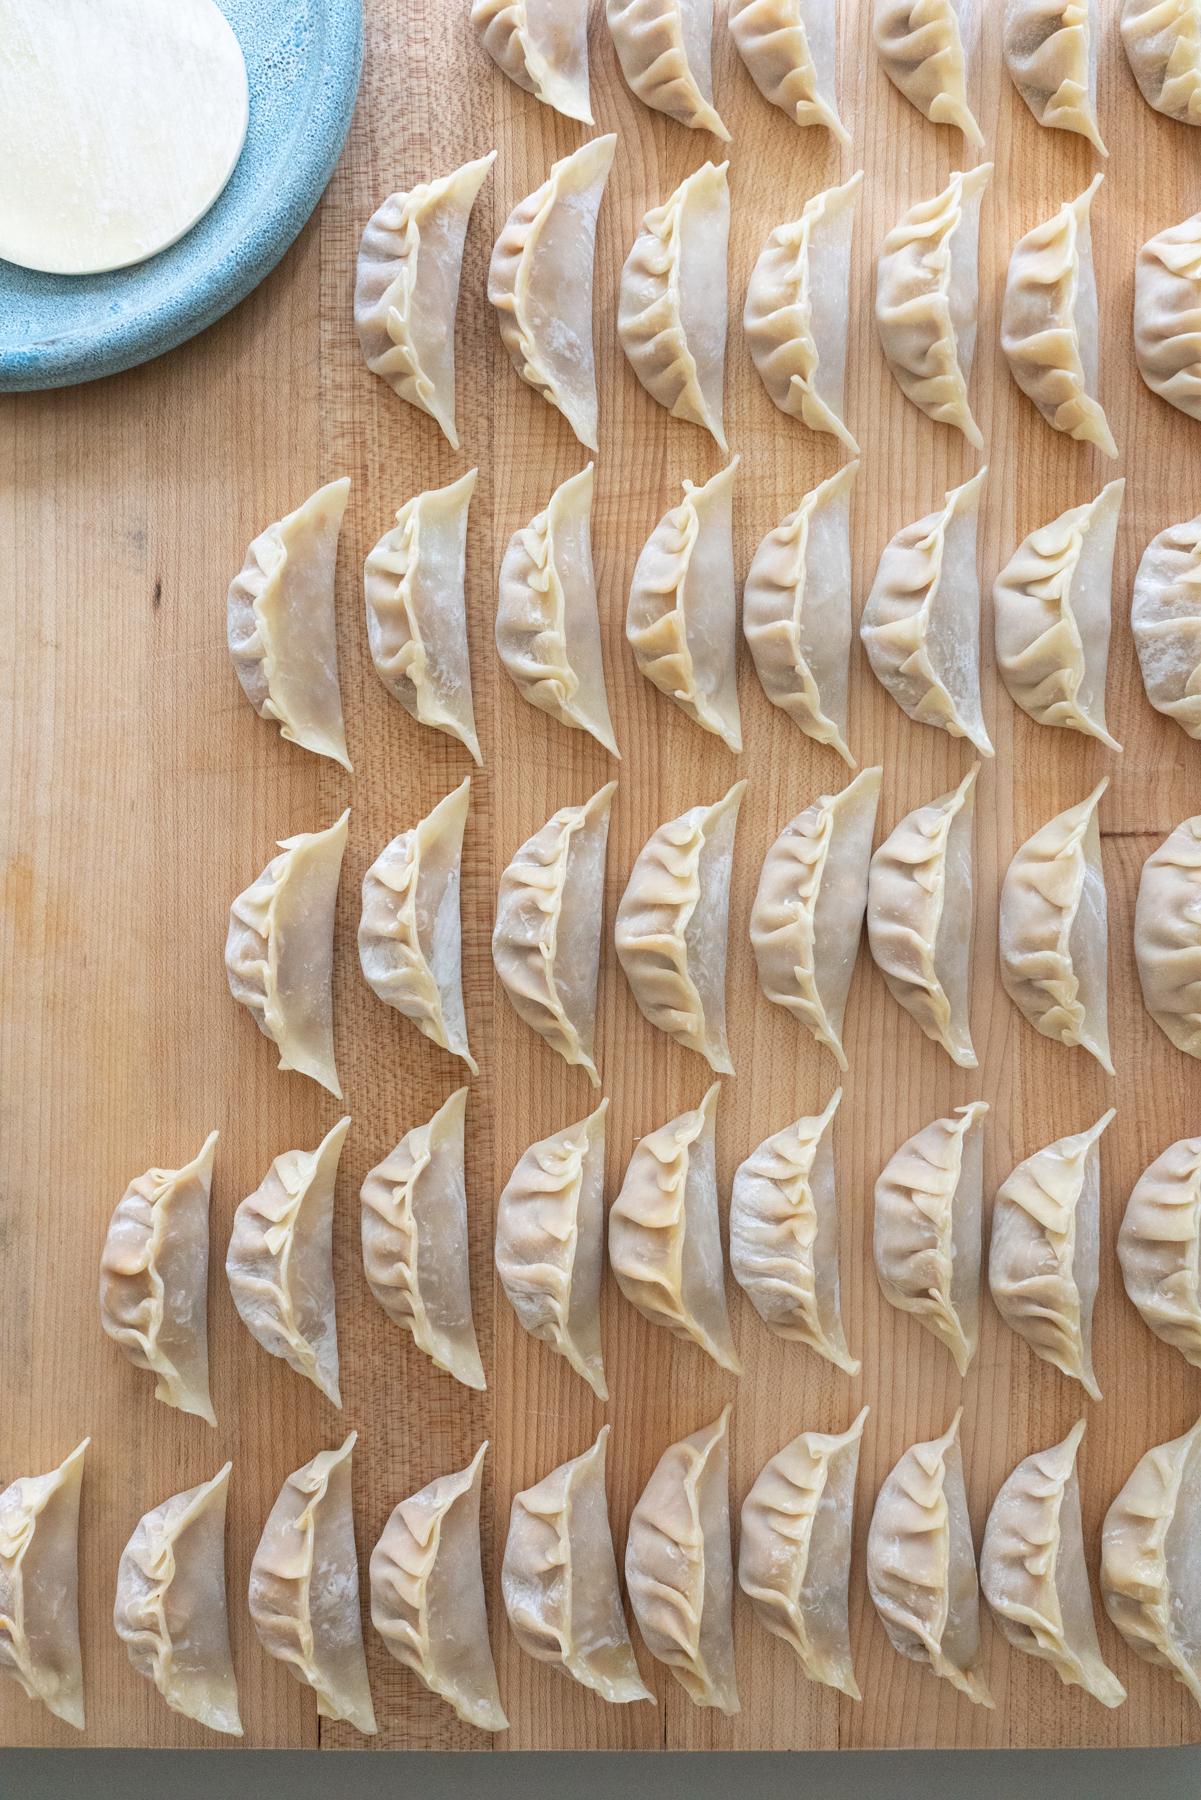 wrapped kimchi dumplings all lined up on a cutting board